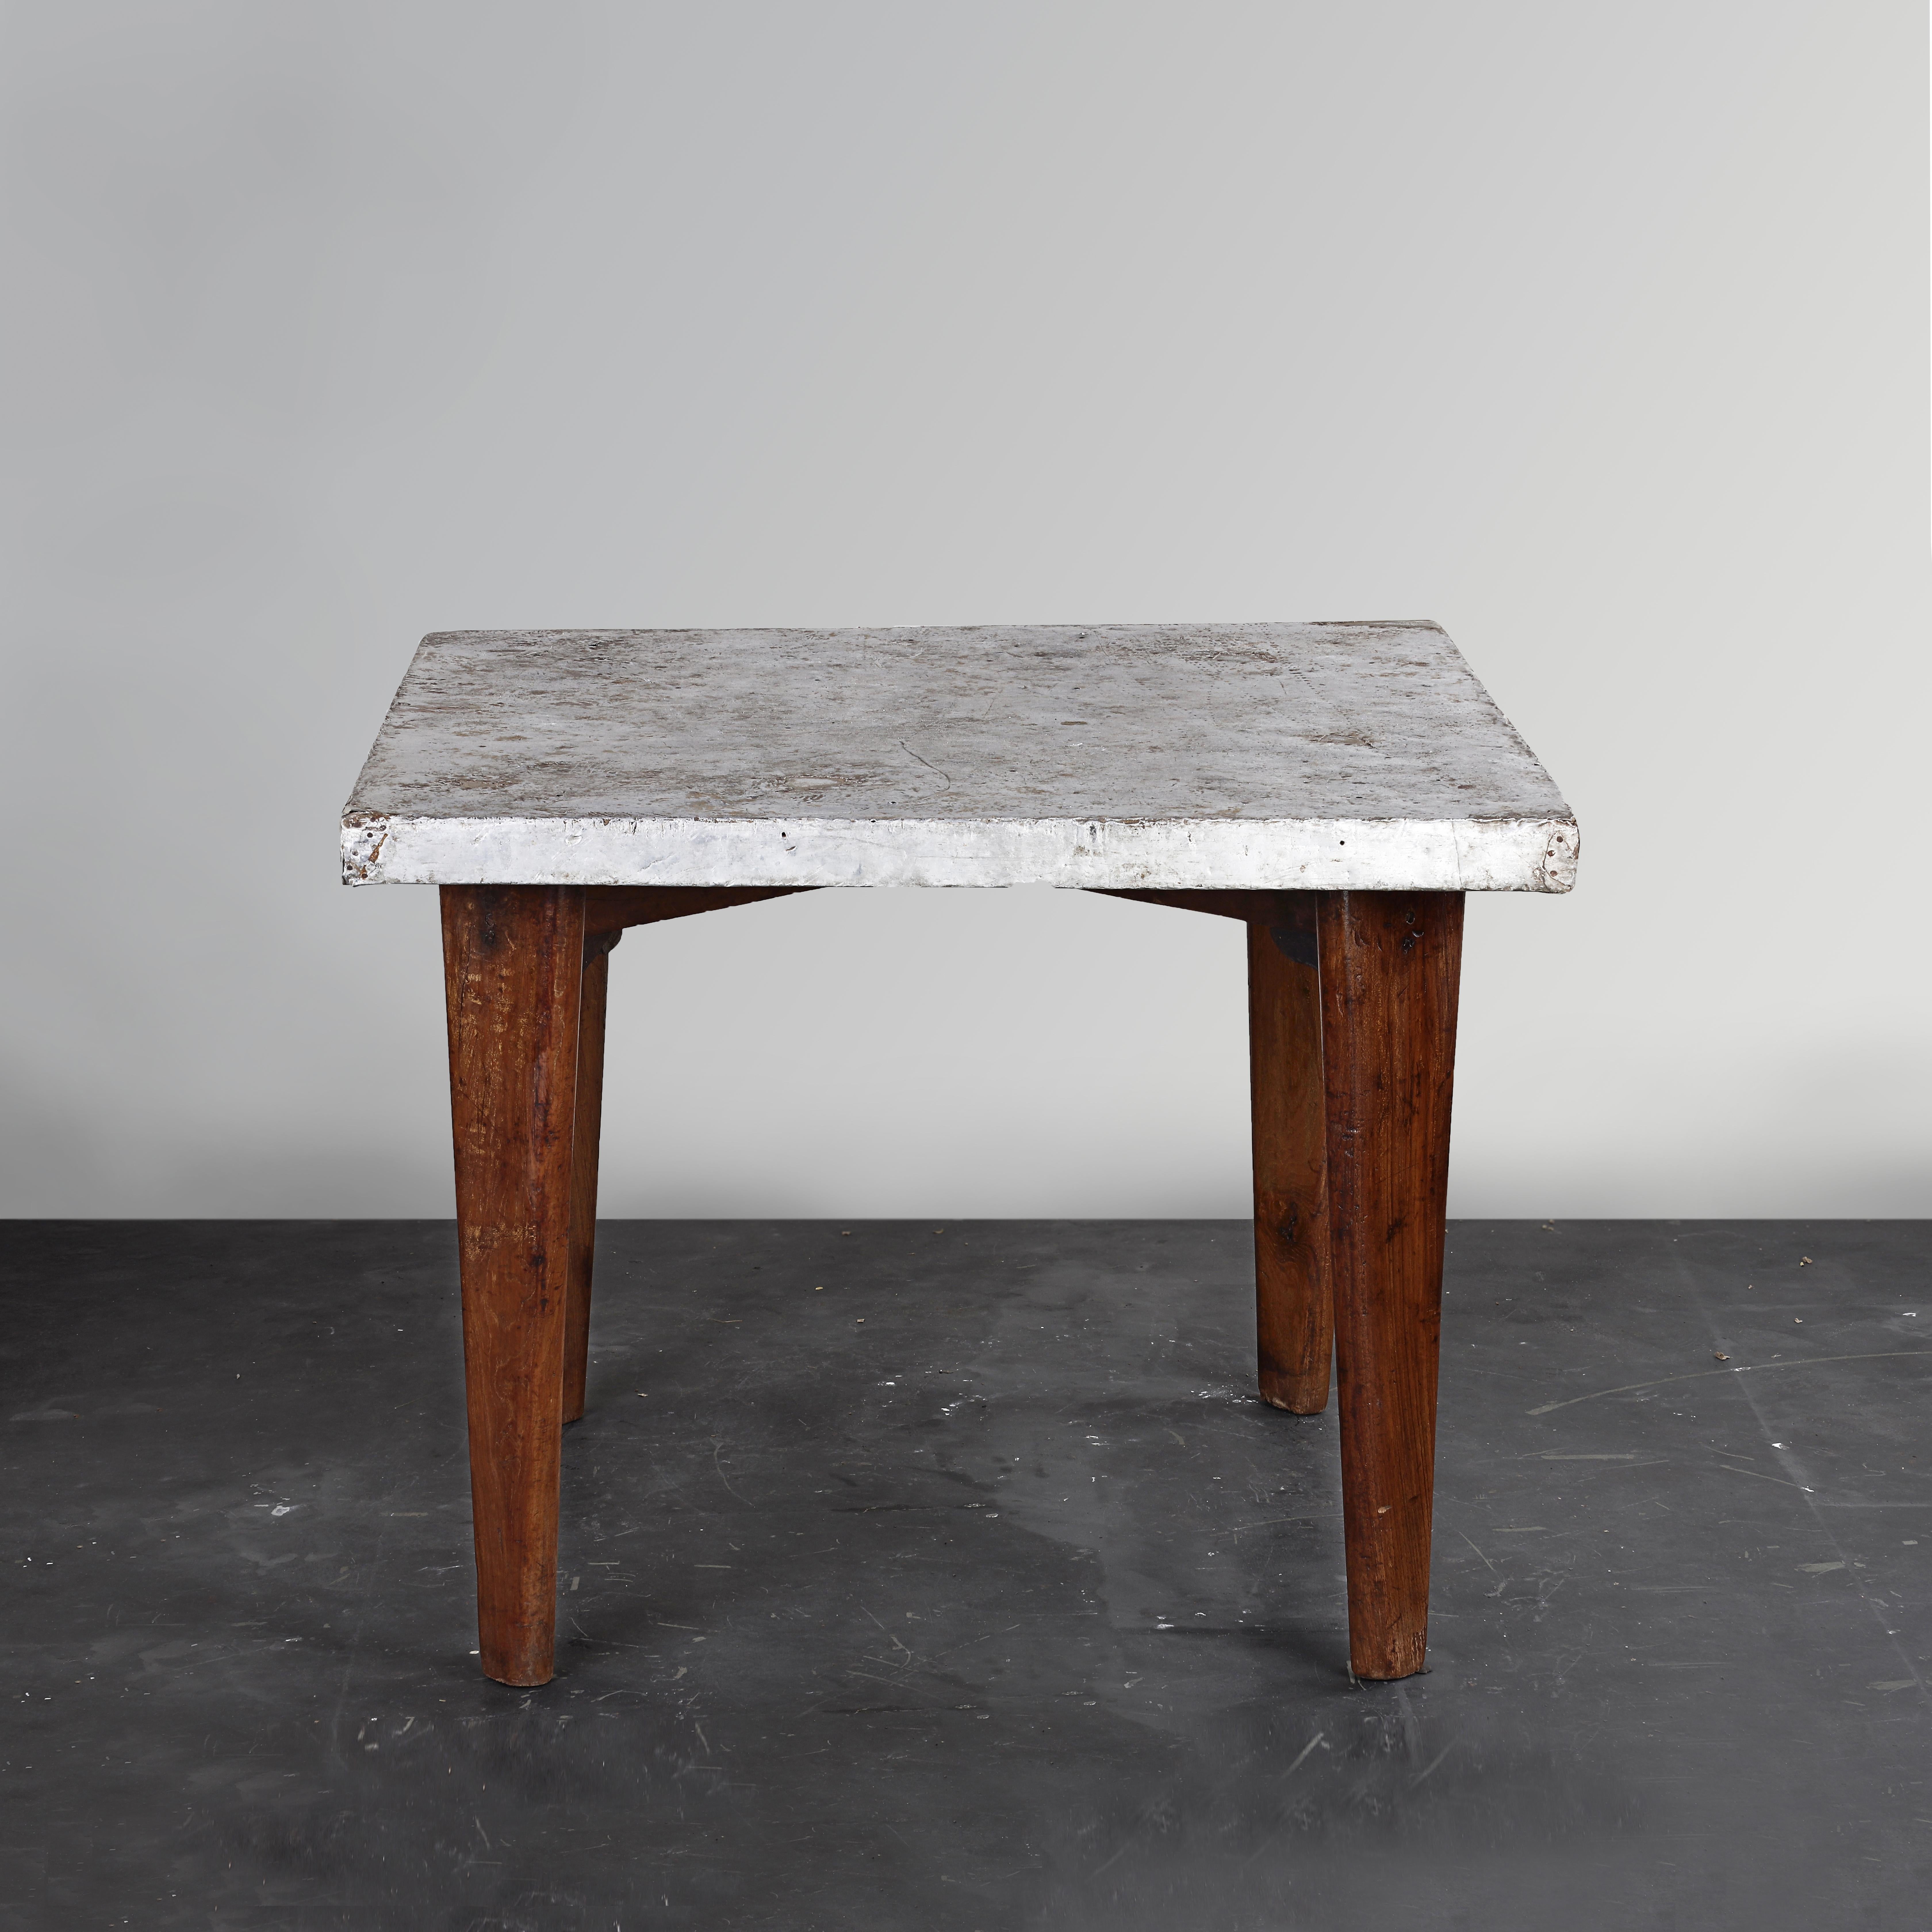 Pierre Jeanneret PJ-TA-04-B Metal Square Table / Authentic Mid-Century Modern In Good Condition For Sale In Zürich, CH